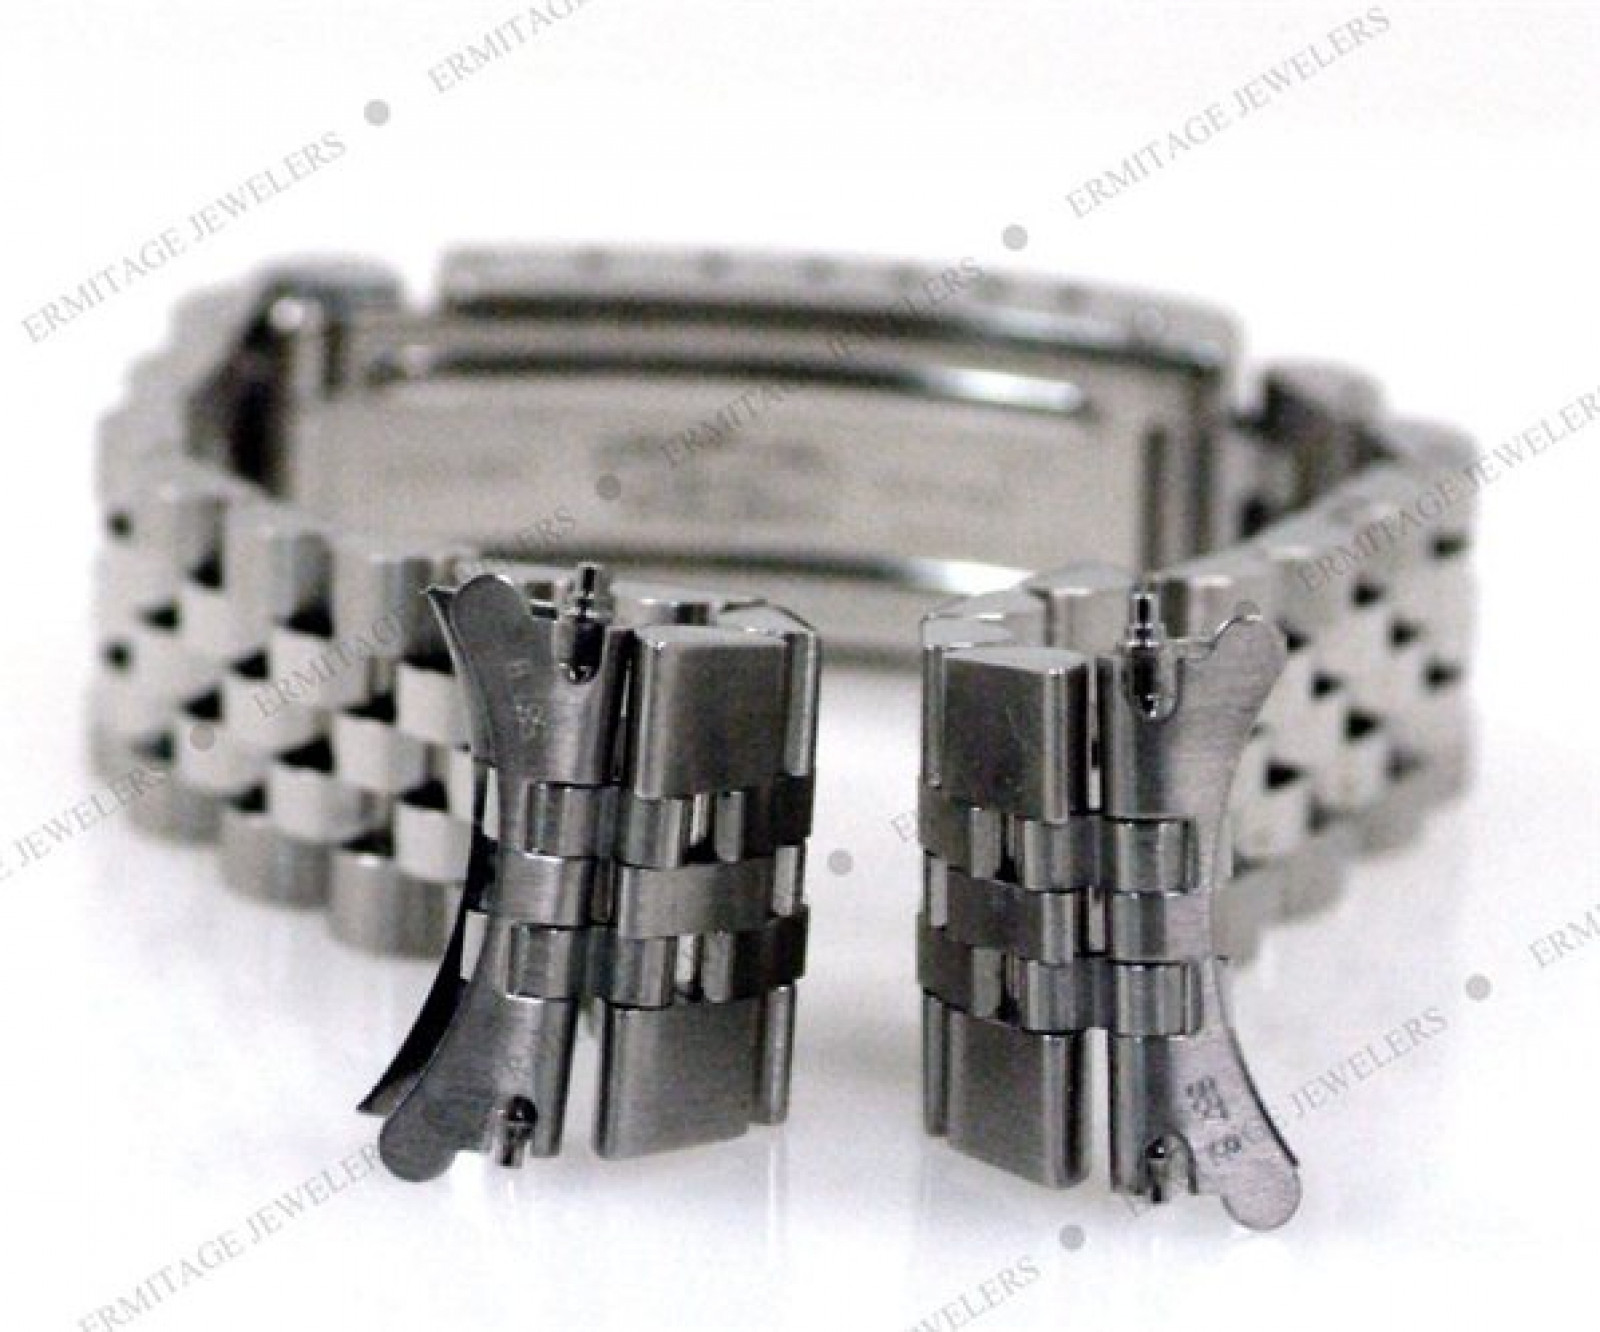 Rolex Datejust 78240 Steel with Silver Dial & Roman Markers